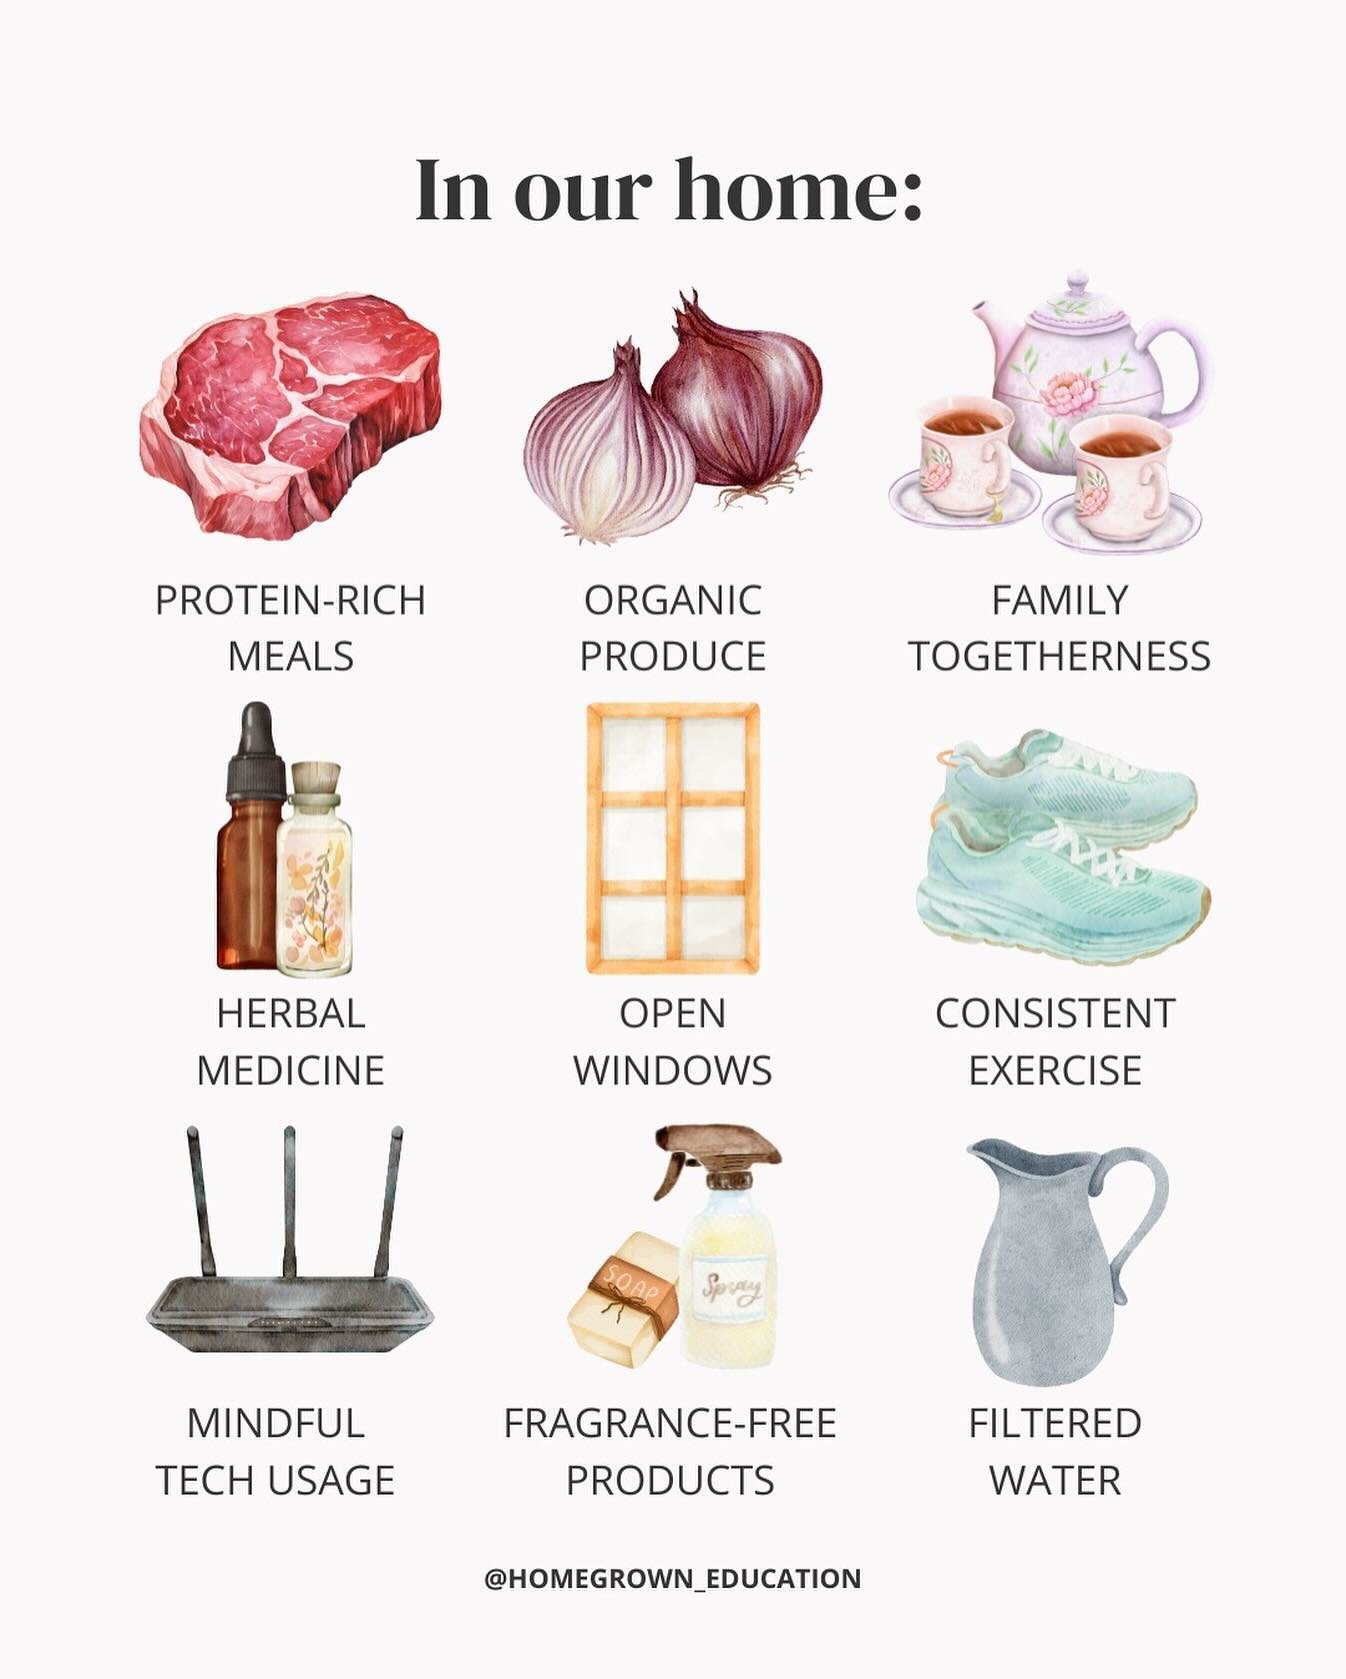 Simplicity is the key to sustainability ✨
Here&rsquo;s what works in our home:
1. Protein at the center of every meal
2. Organic fruits and vegetables as much as possible
3. Time spent together, and lots of it
4. Herbal medicine and whole food supple